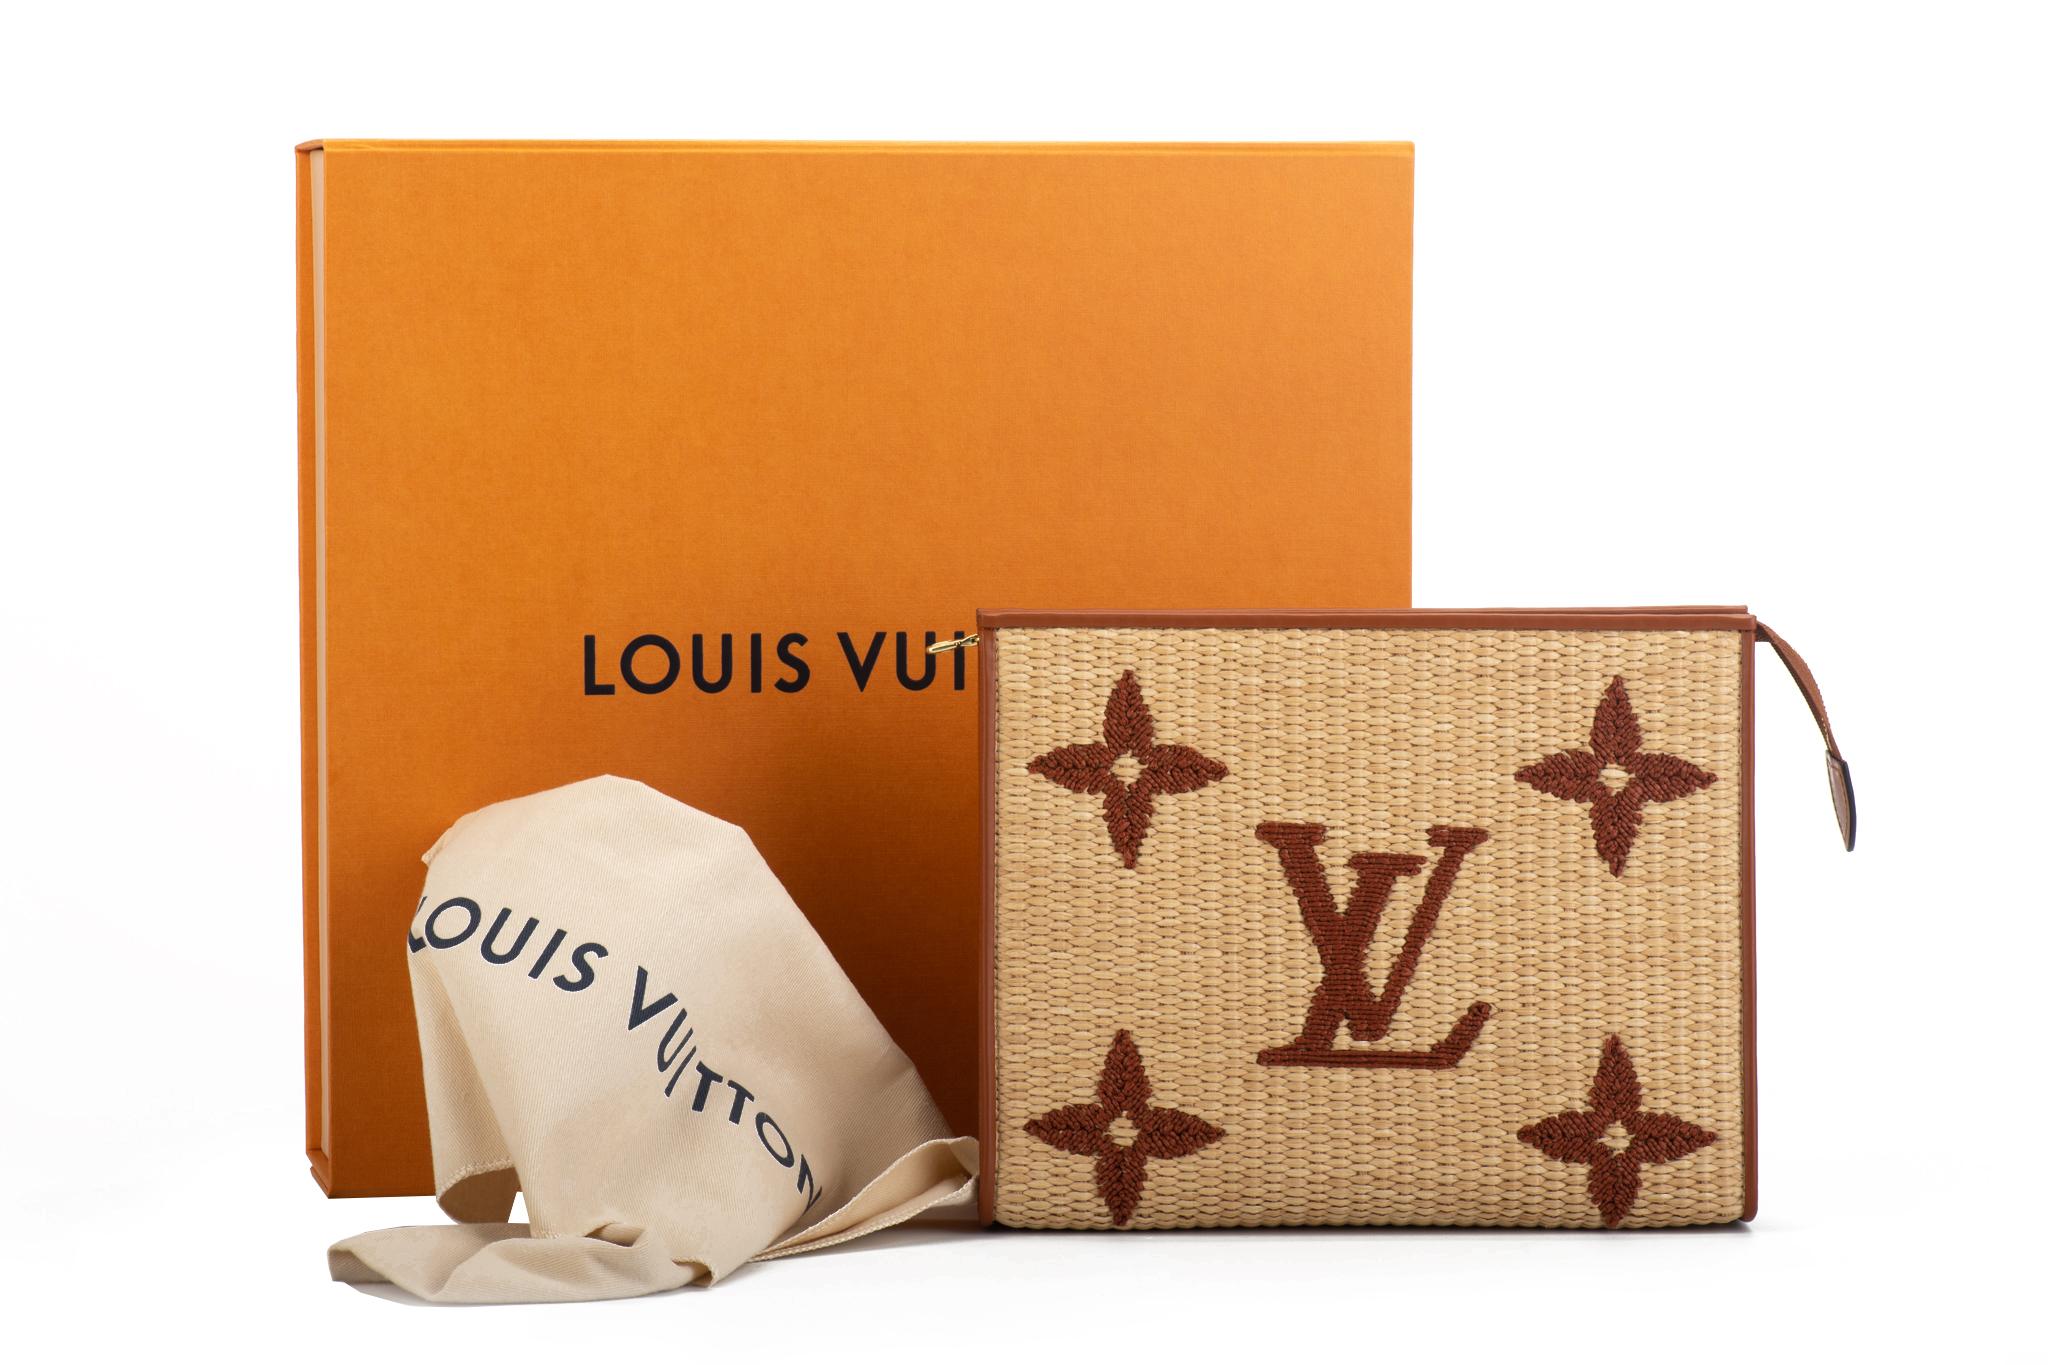 Louis Vuitton limited edition raffia clutch with caramel brown leather trimming and oversize embroidered logo. Striped fabric interior lining. Brand new with original dust cover and box.